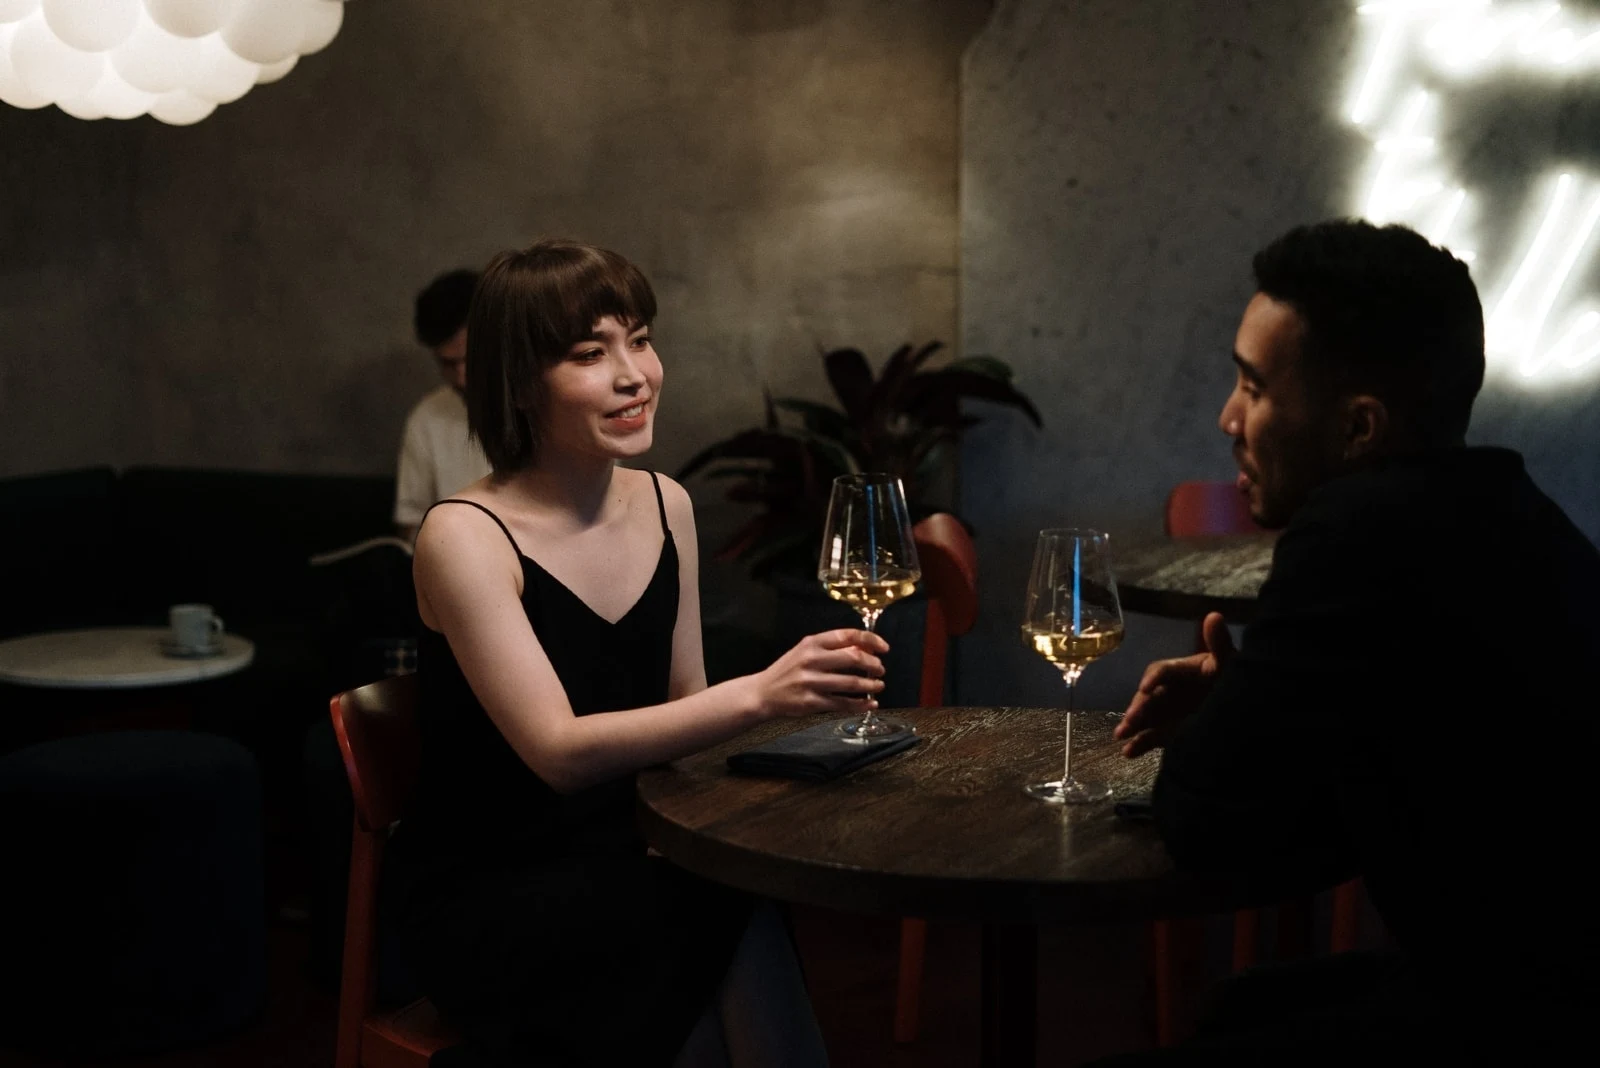 man and woman drinking wine while sitting at table